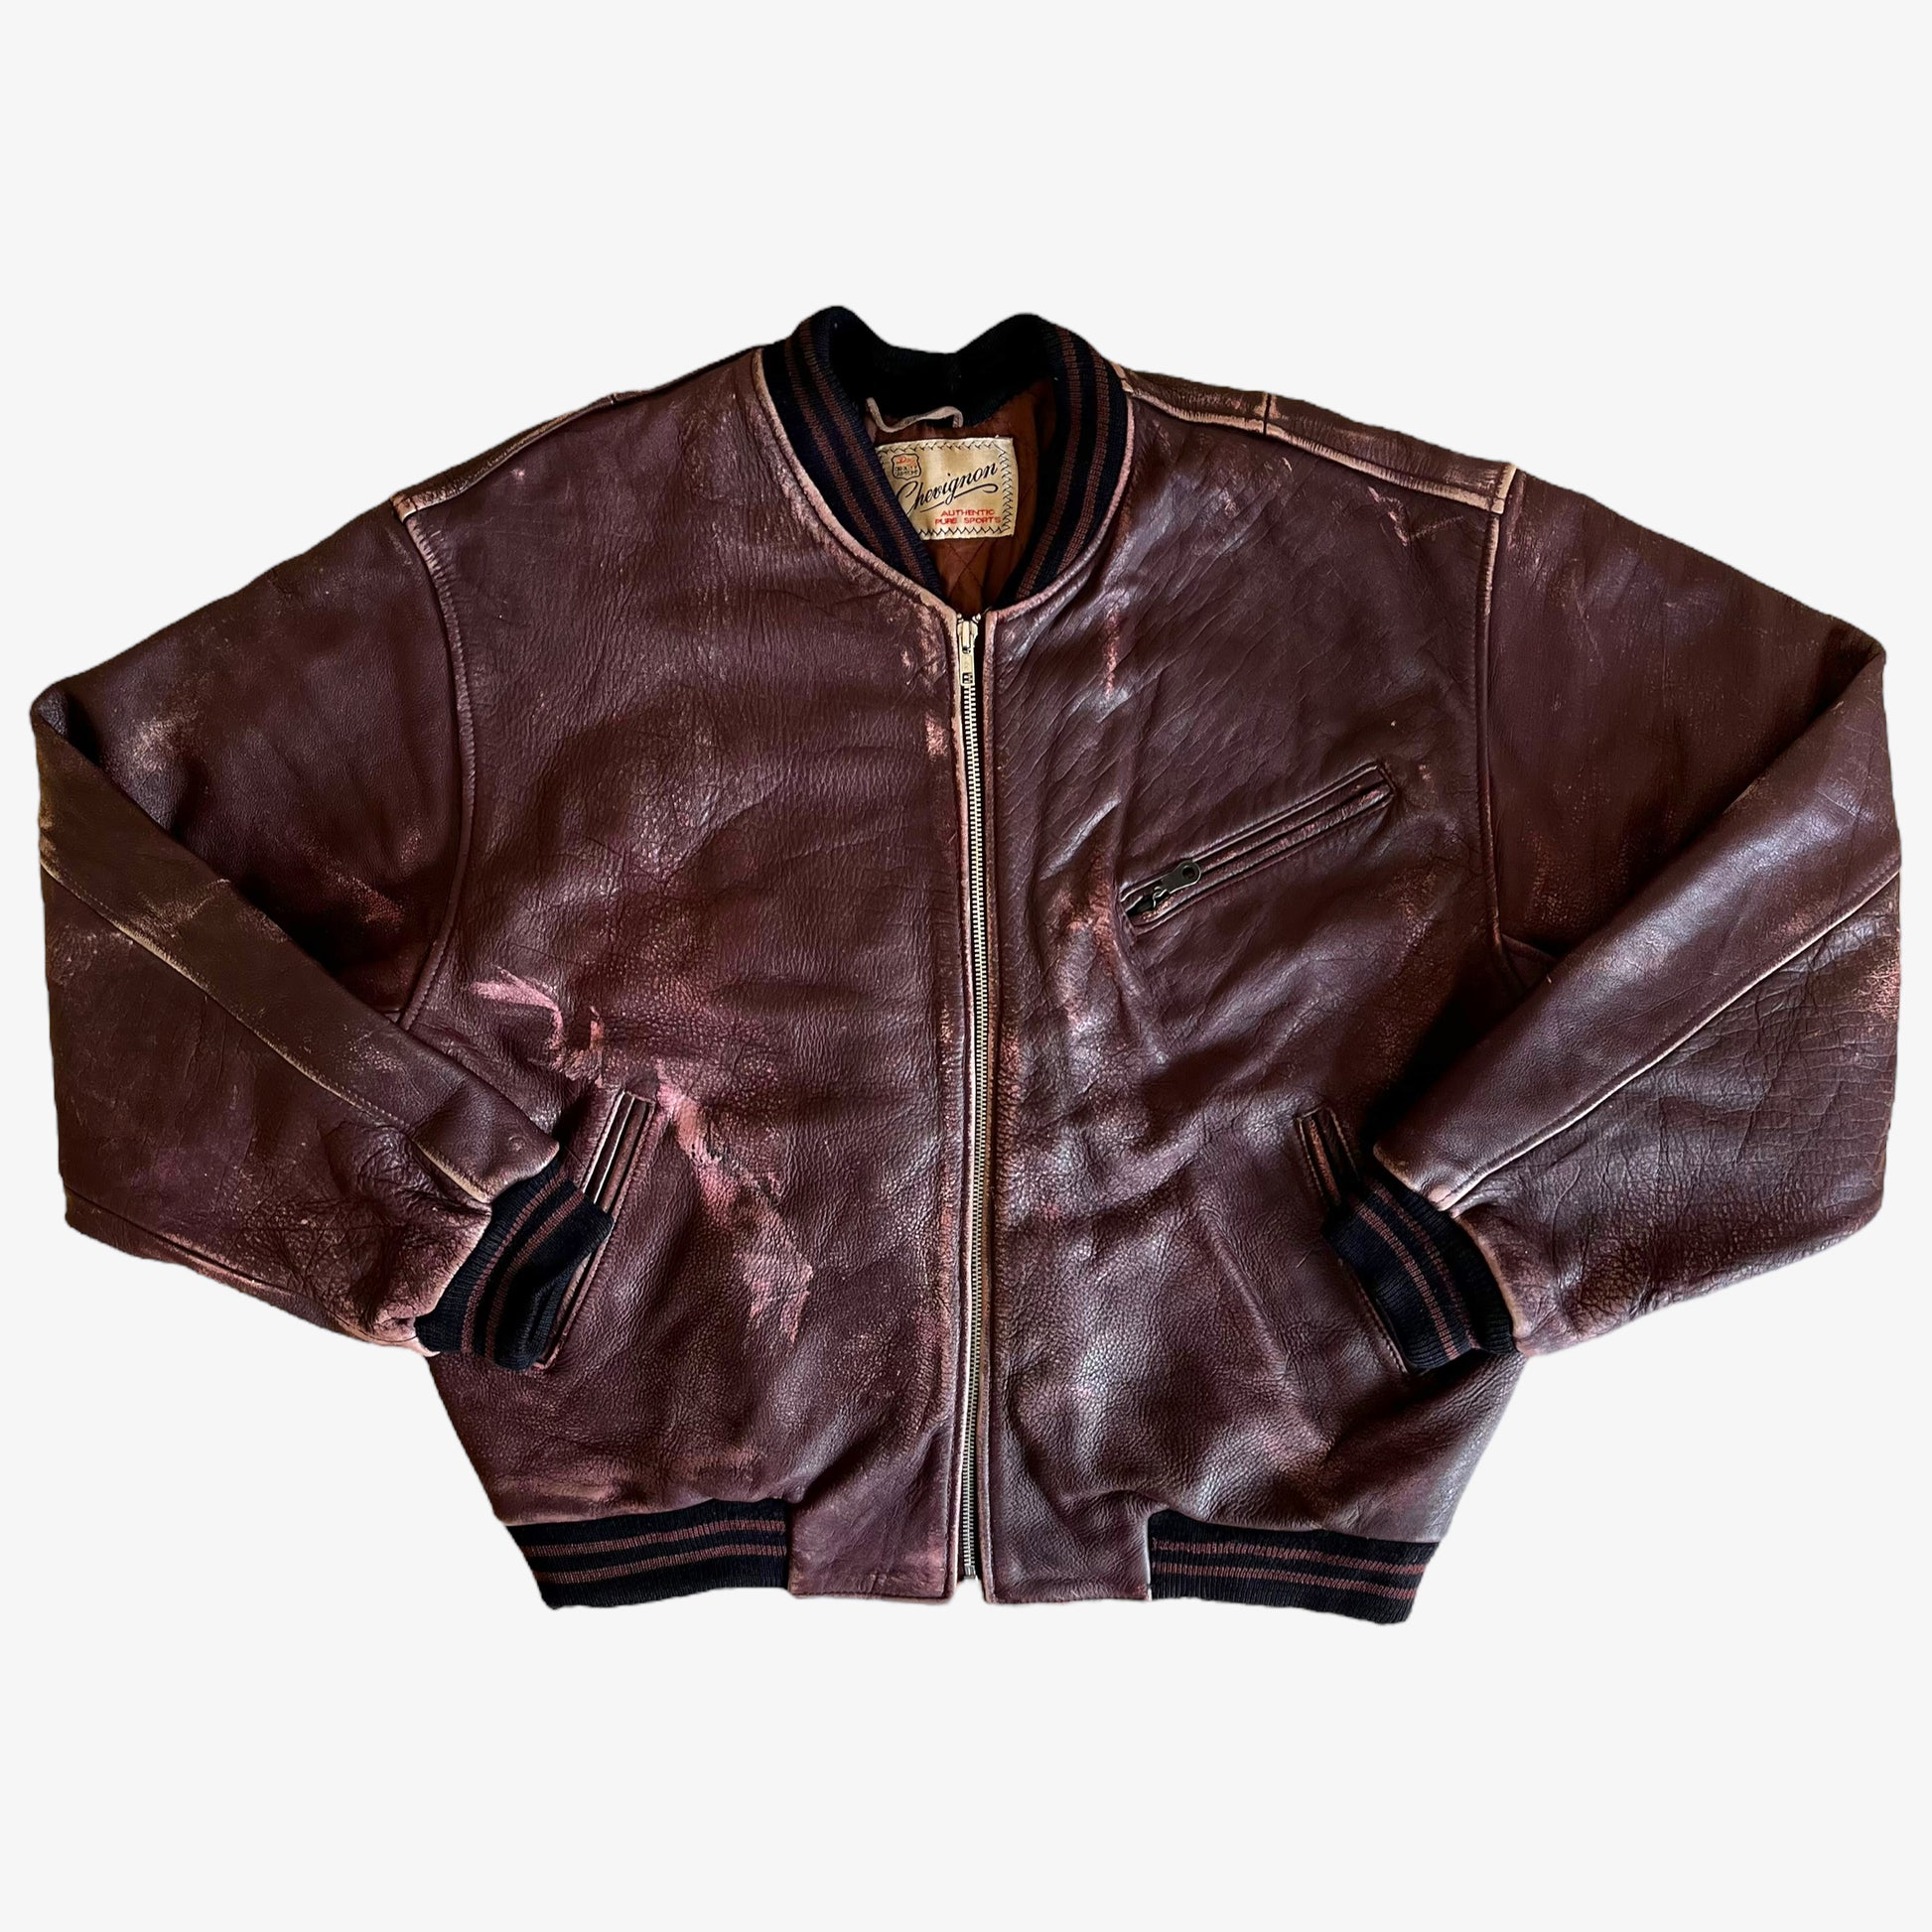 Vintage 90s Chevignon Burgundy Leather Jacket With Back Spell Out - Casspios Dream